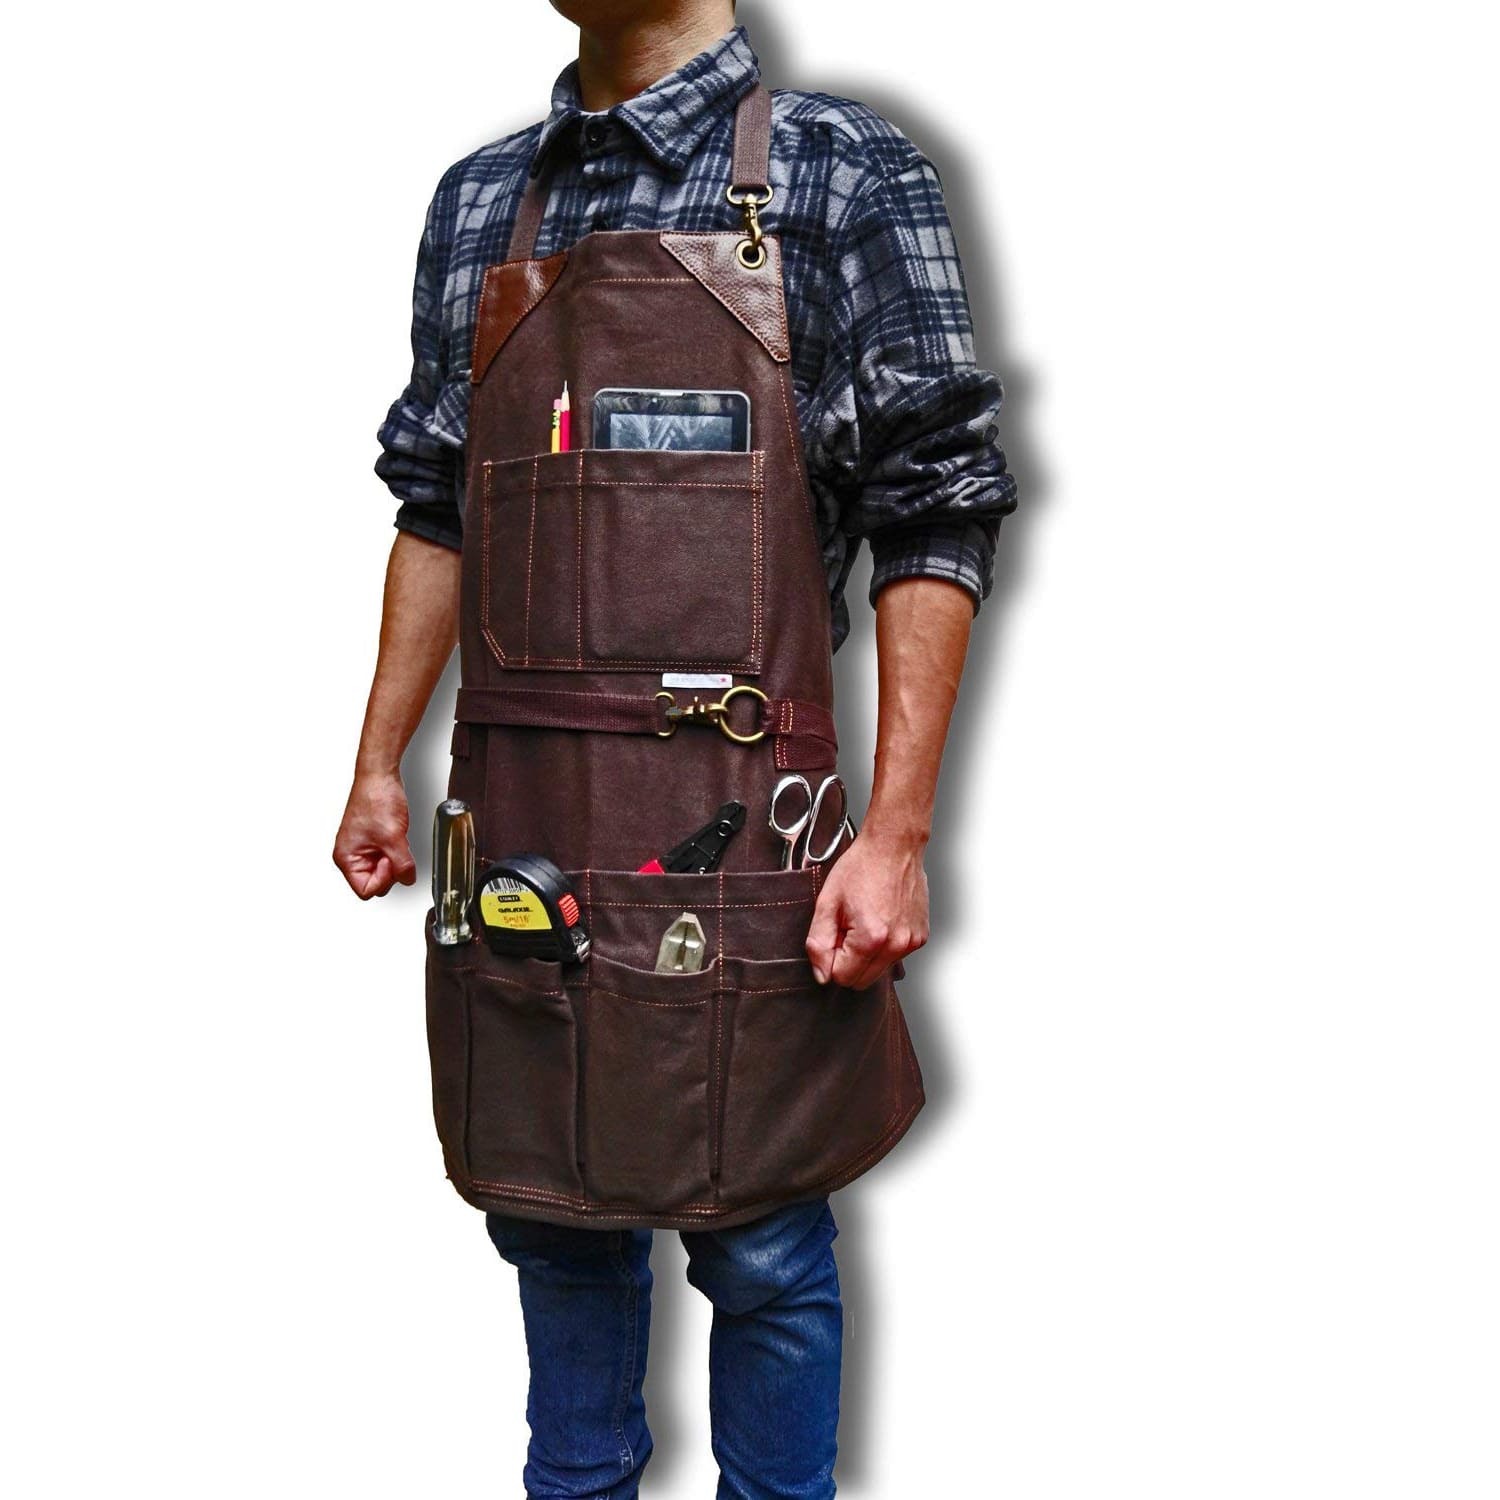 Top 10 Best Canvas Work Aprons in 2020 Reviews | Buyer's Guide